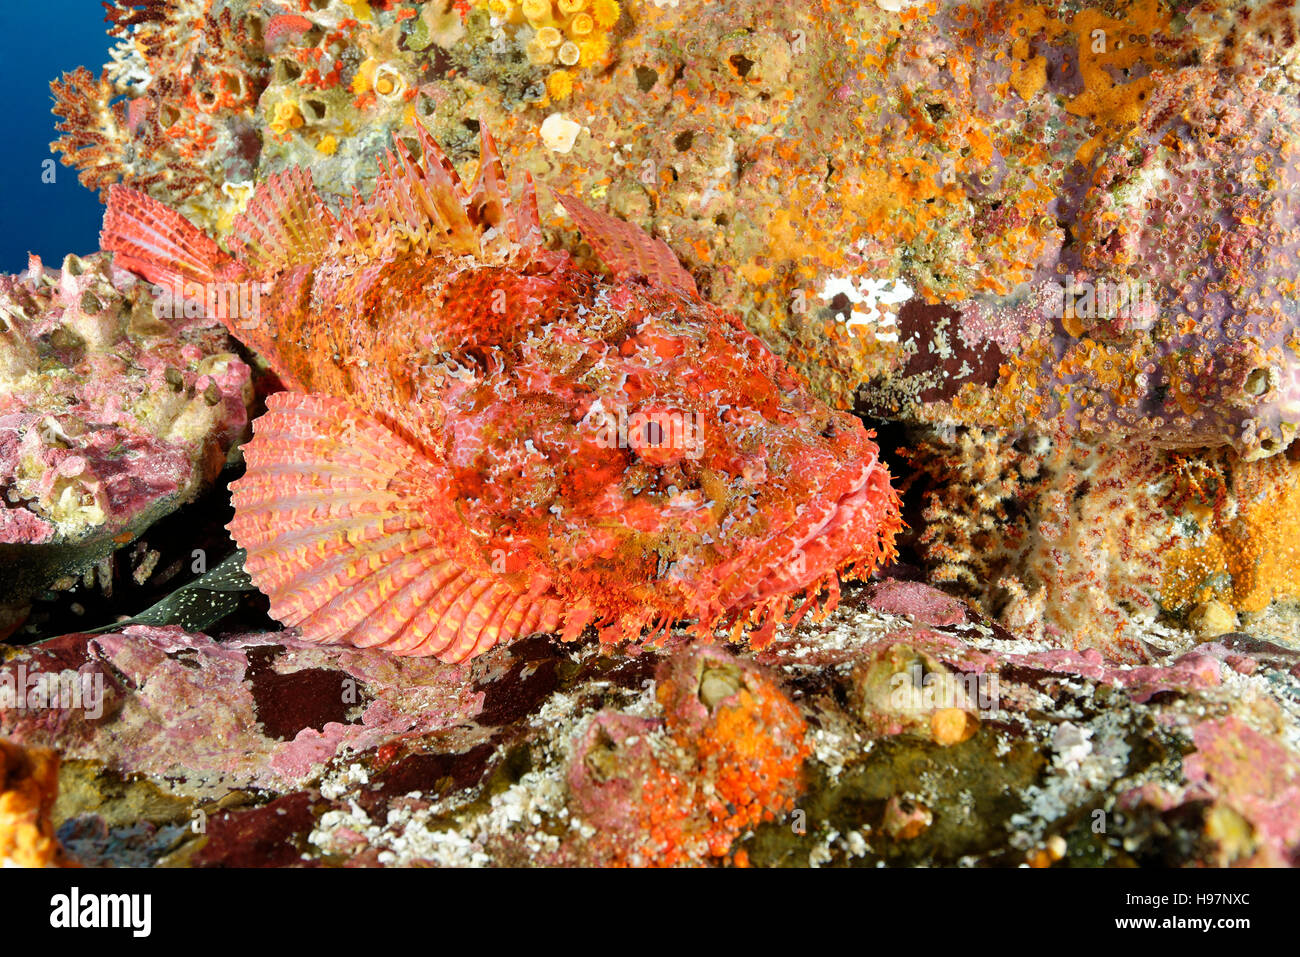 Stone scorpionfish, Pacific spotted scorpionfish, Malpelo Island, Colombia, East Pacific Ocean Stock Photo